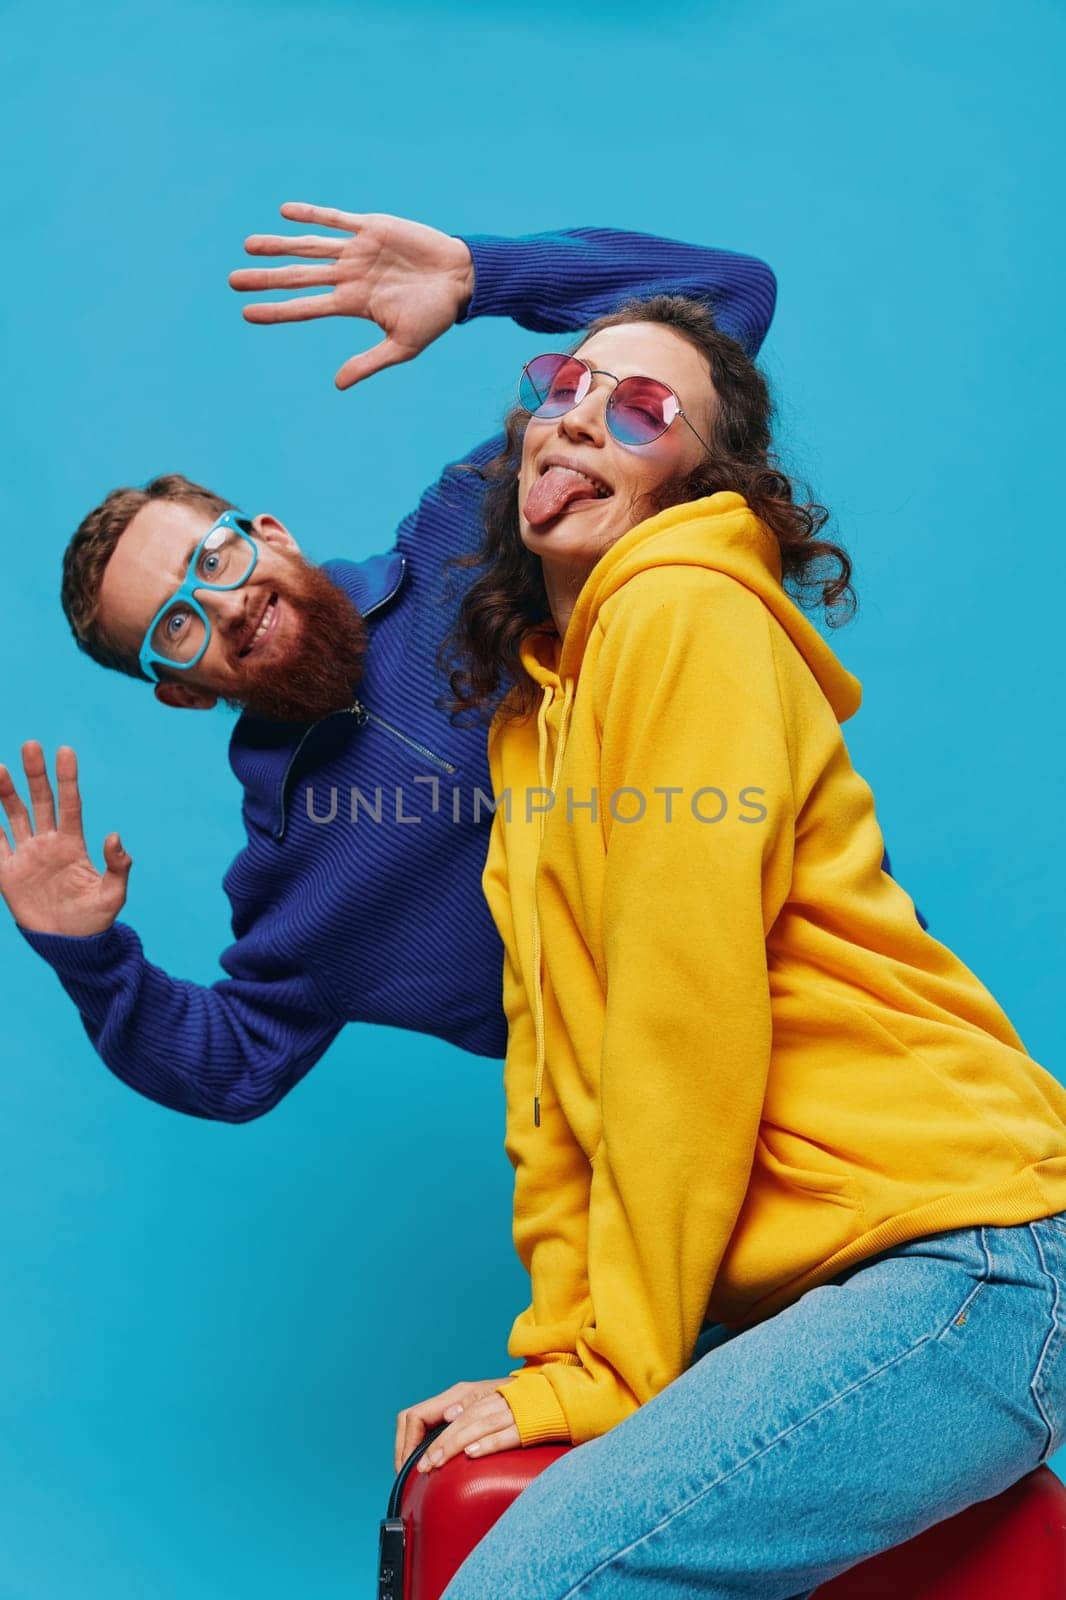 Woman and man smile sitting on suitcase with red suitcase smile, on blue background, packing for trip, family vacation trip. High quality photo